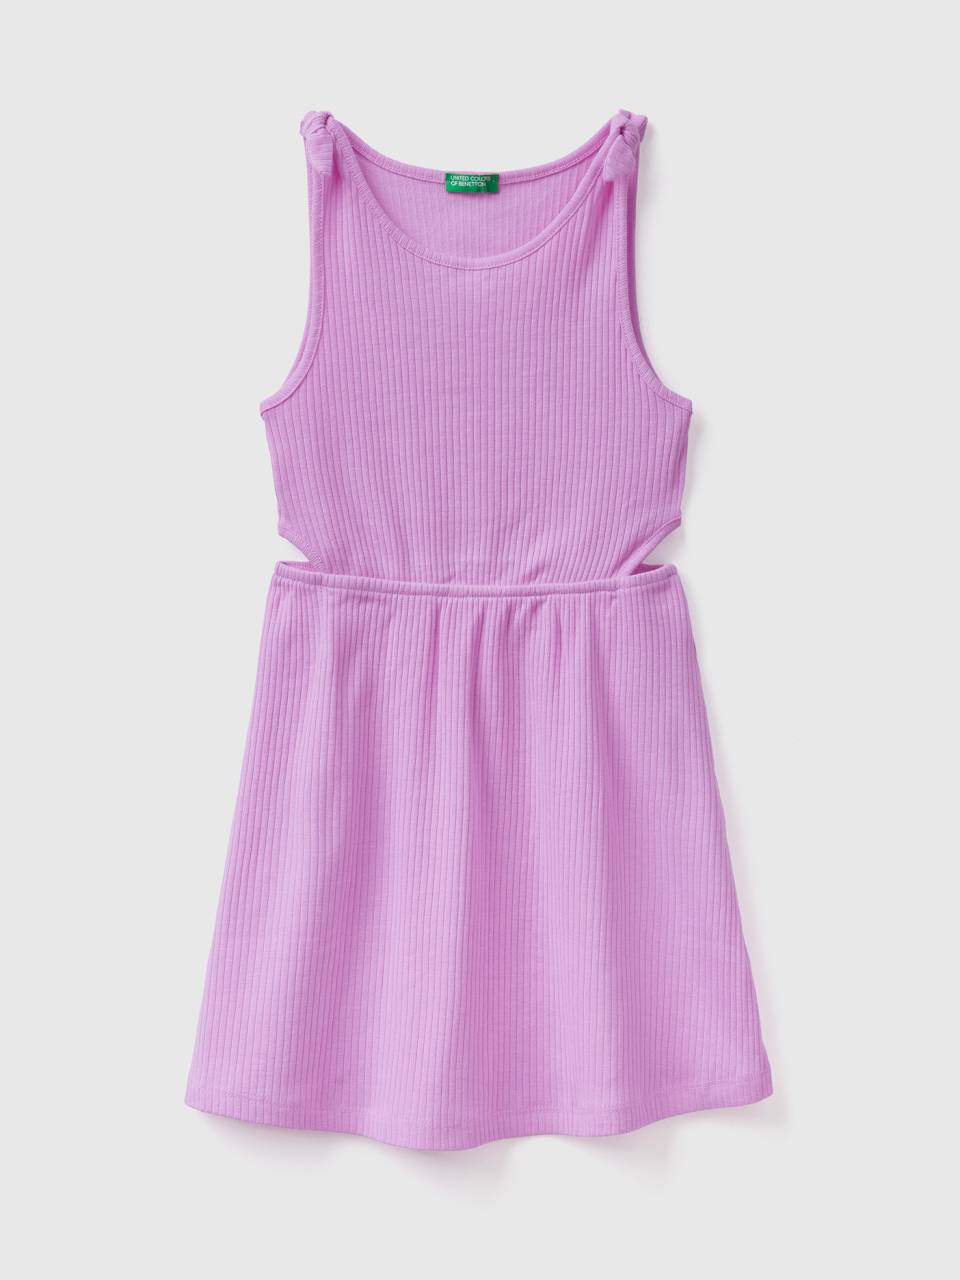 Benetton ribbed dress with shoulder straps. 1